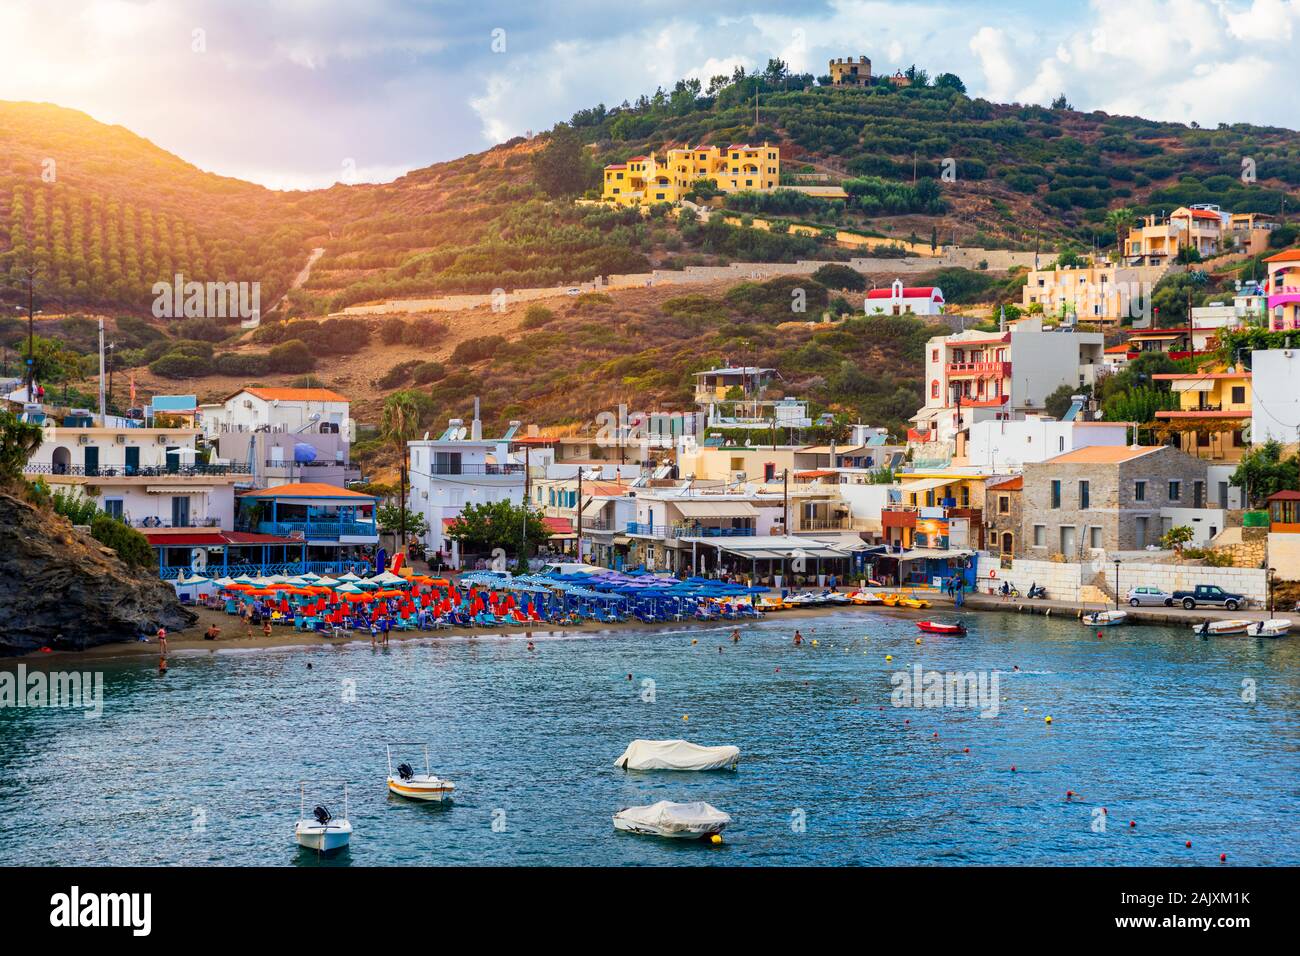 Panorama of Harbour with vessels, boats, beach and lighthouse in Bali at sunrise, Rethymno, Crete, Greece. Famous summer resort in Bali village, near Stock Photo